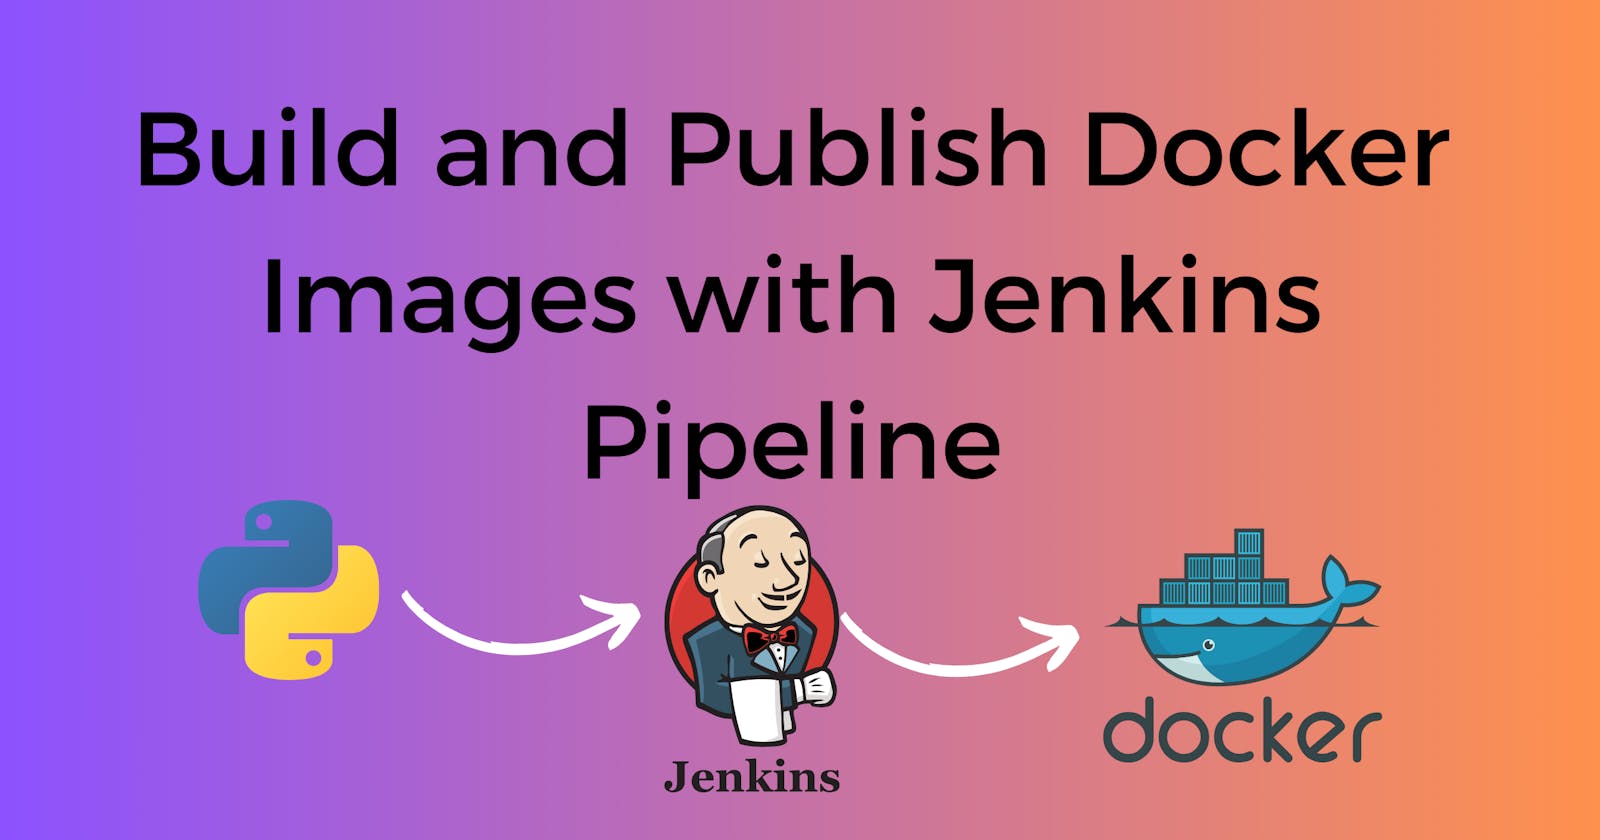 Build and Publish Docker Images with Jenkins Pipeline